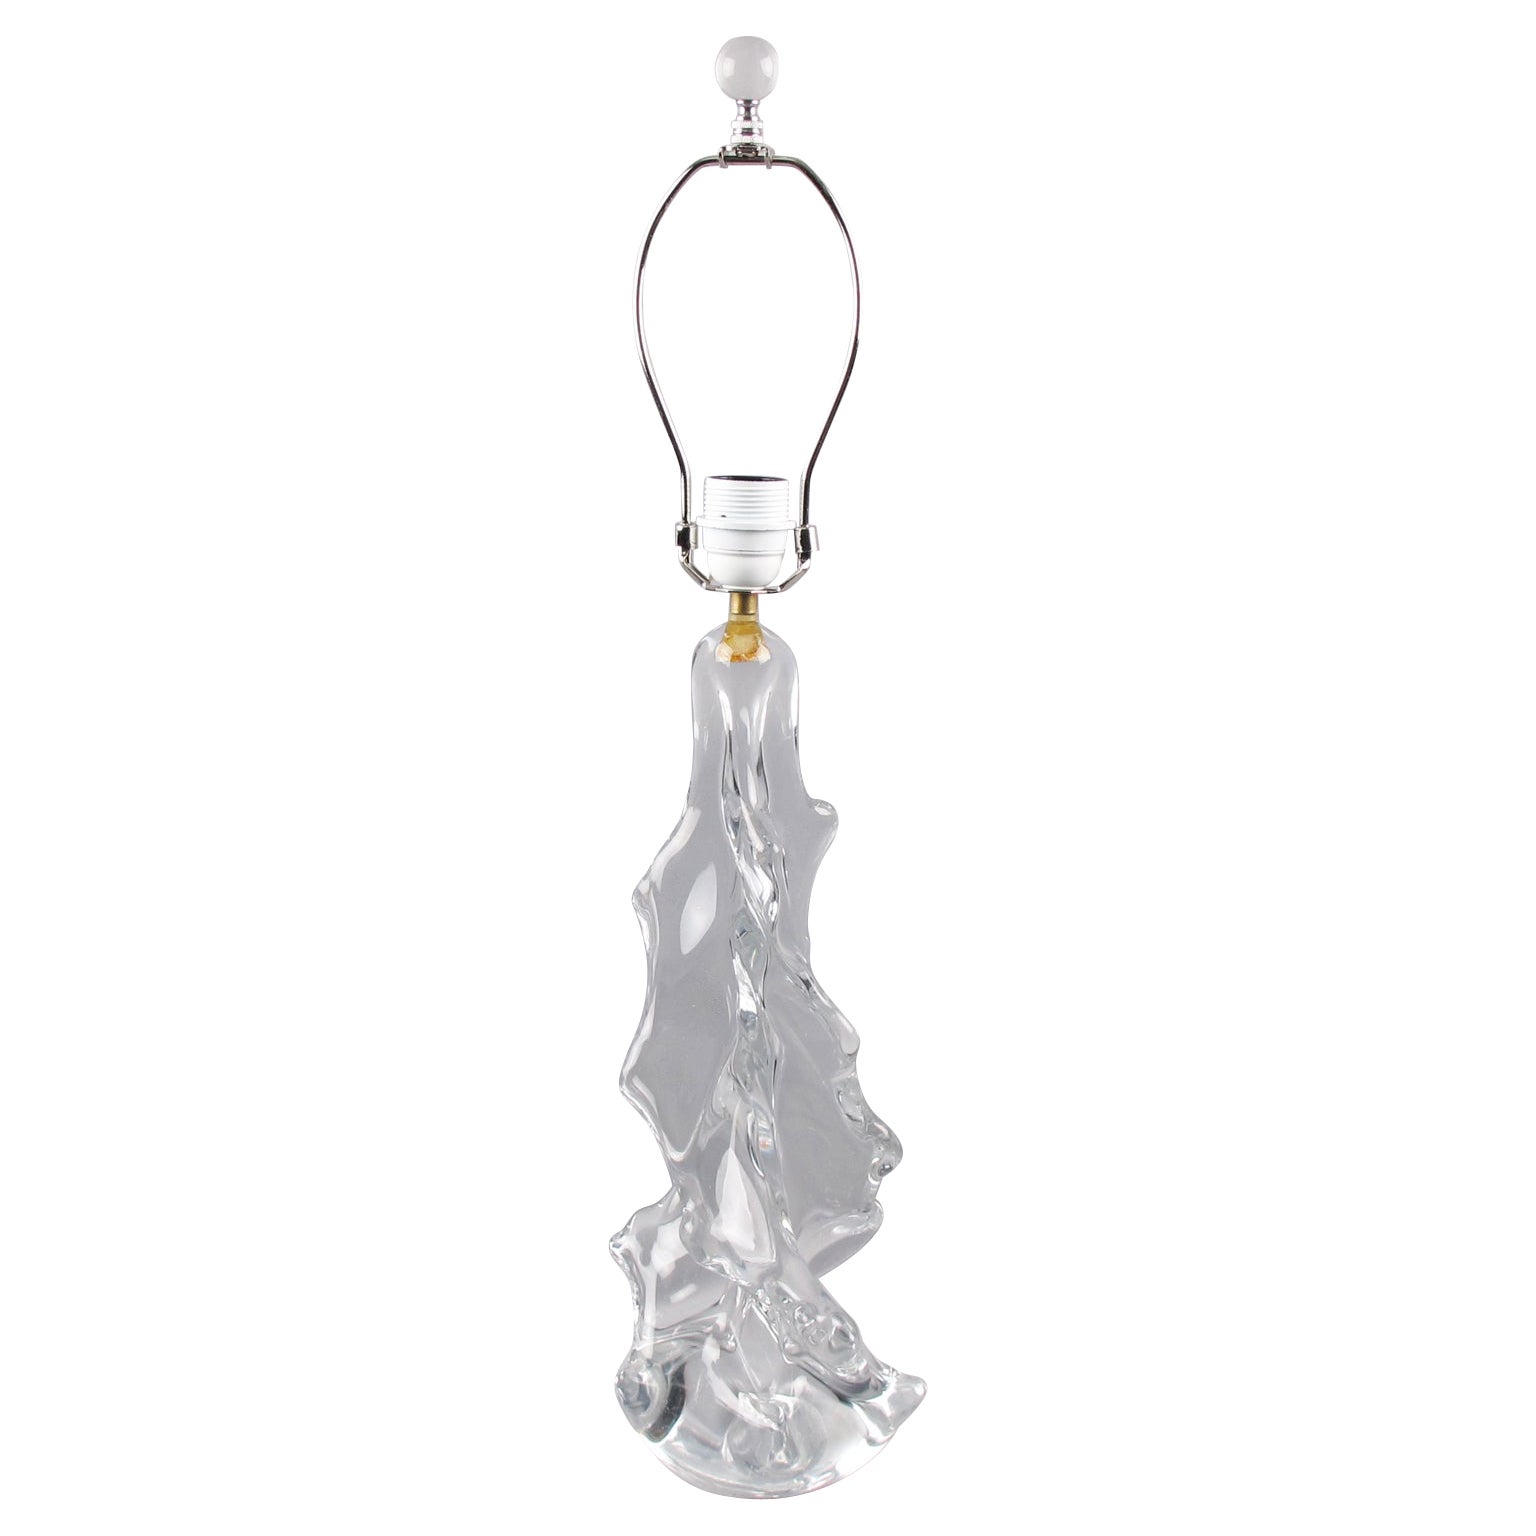 Charles Schneider Crystal Art Glass Table Lamp, 1950s For Sale